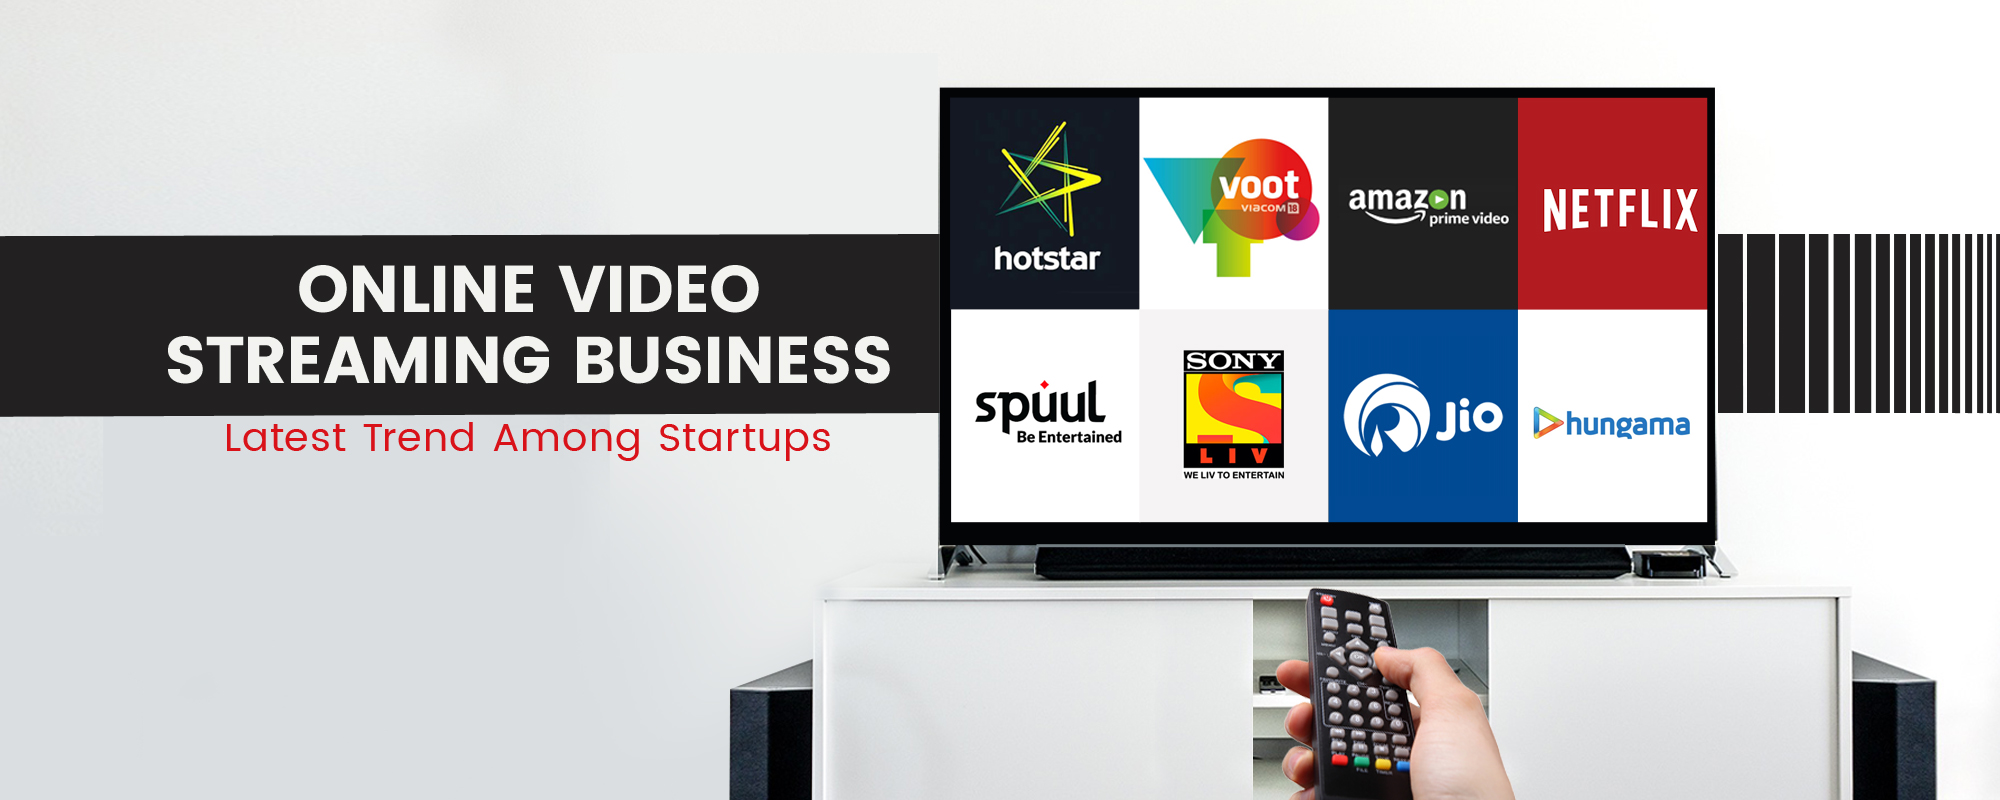 On-demand Video Service Is a Hot Trend in India & How Startups Should Capitalize